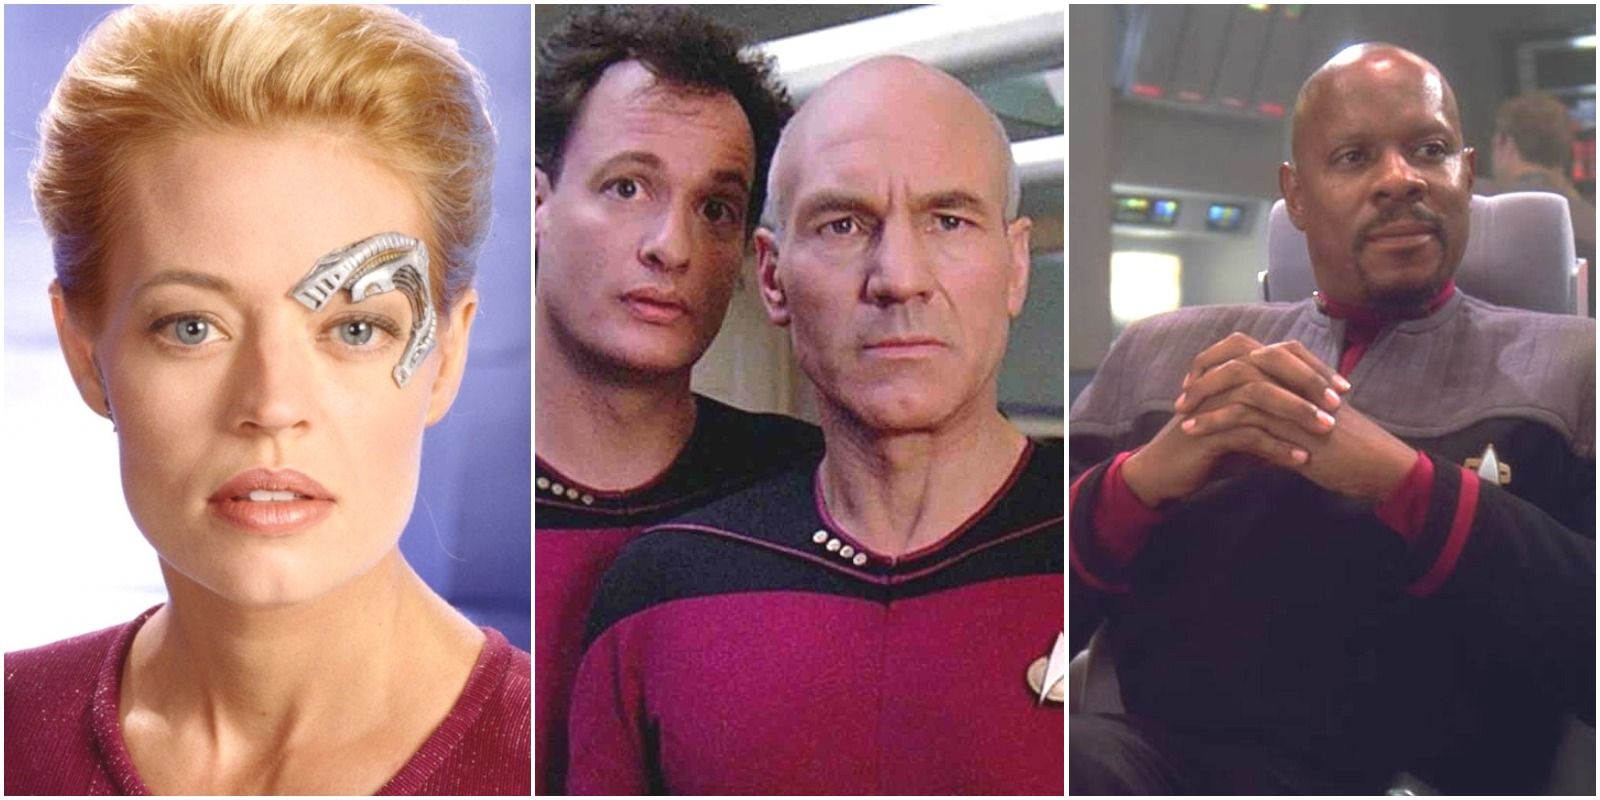 Seven of Nine, Sisko, and Picard from the Star Trek Universe